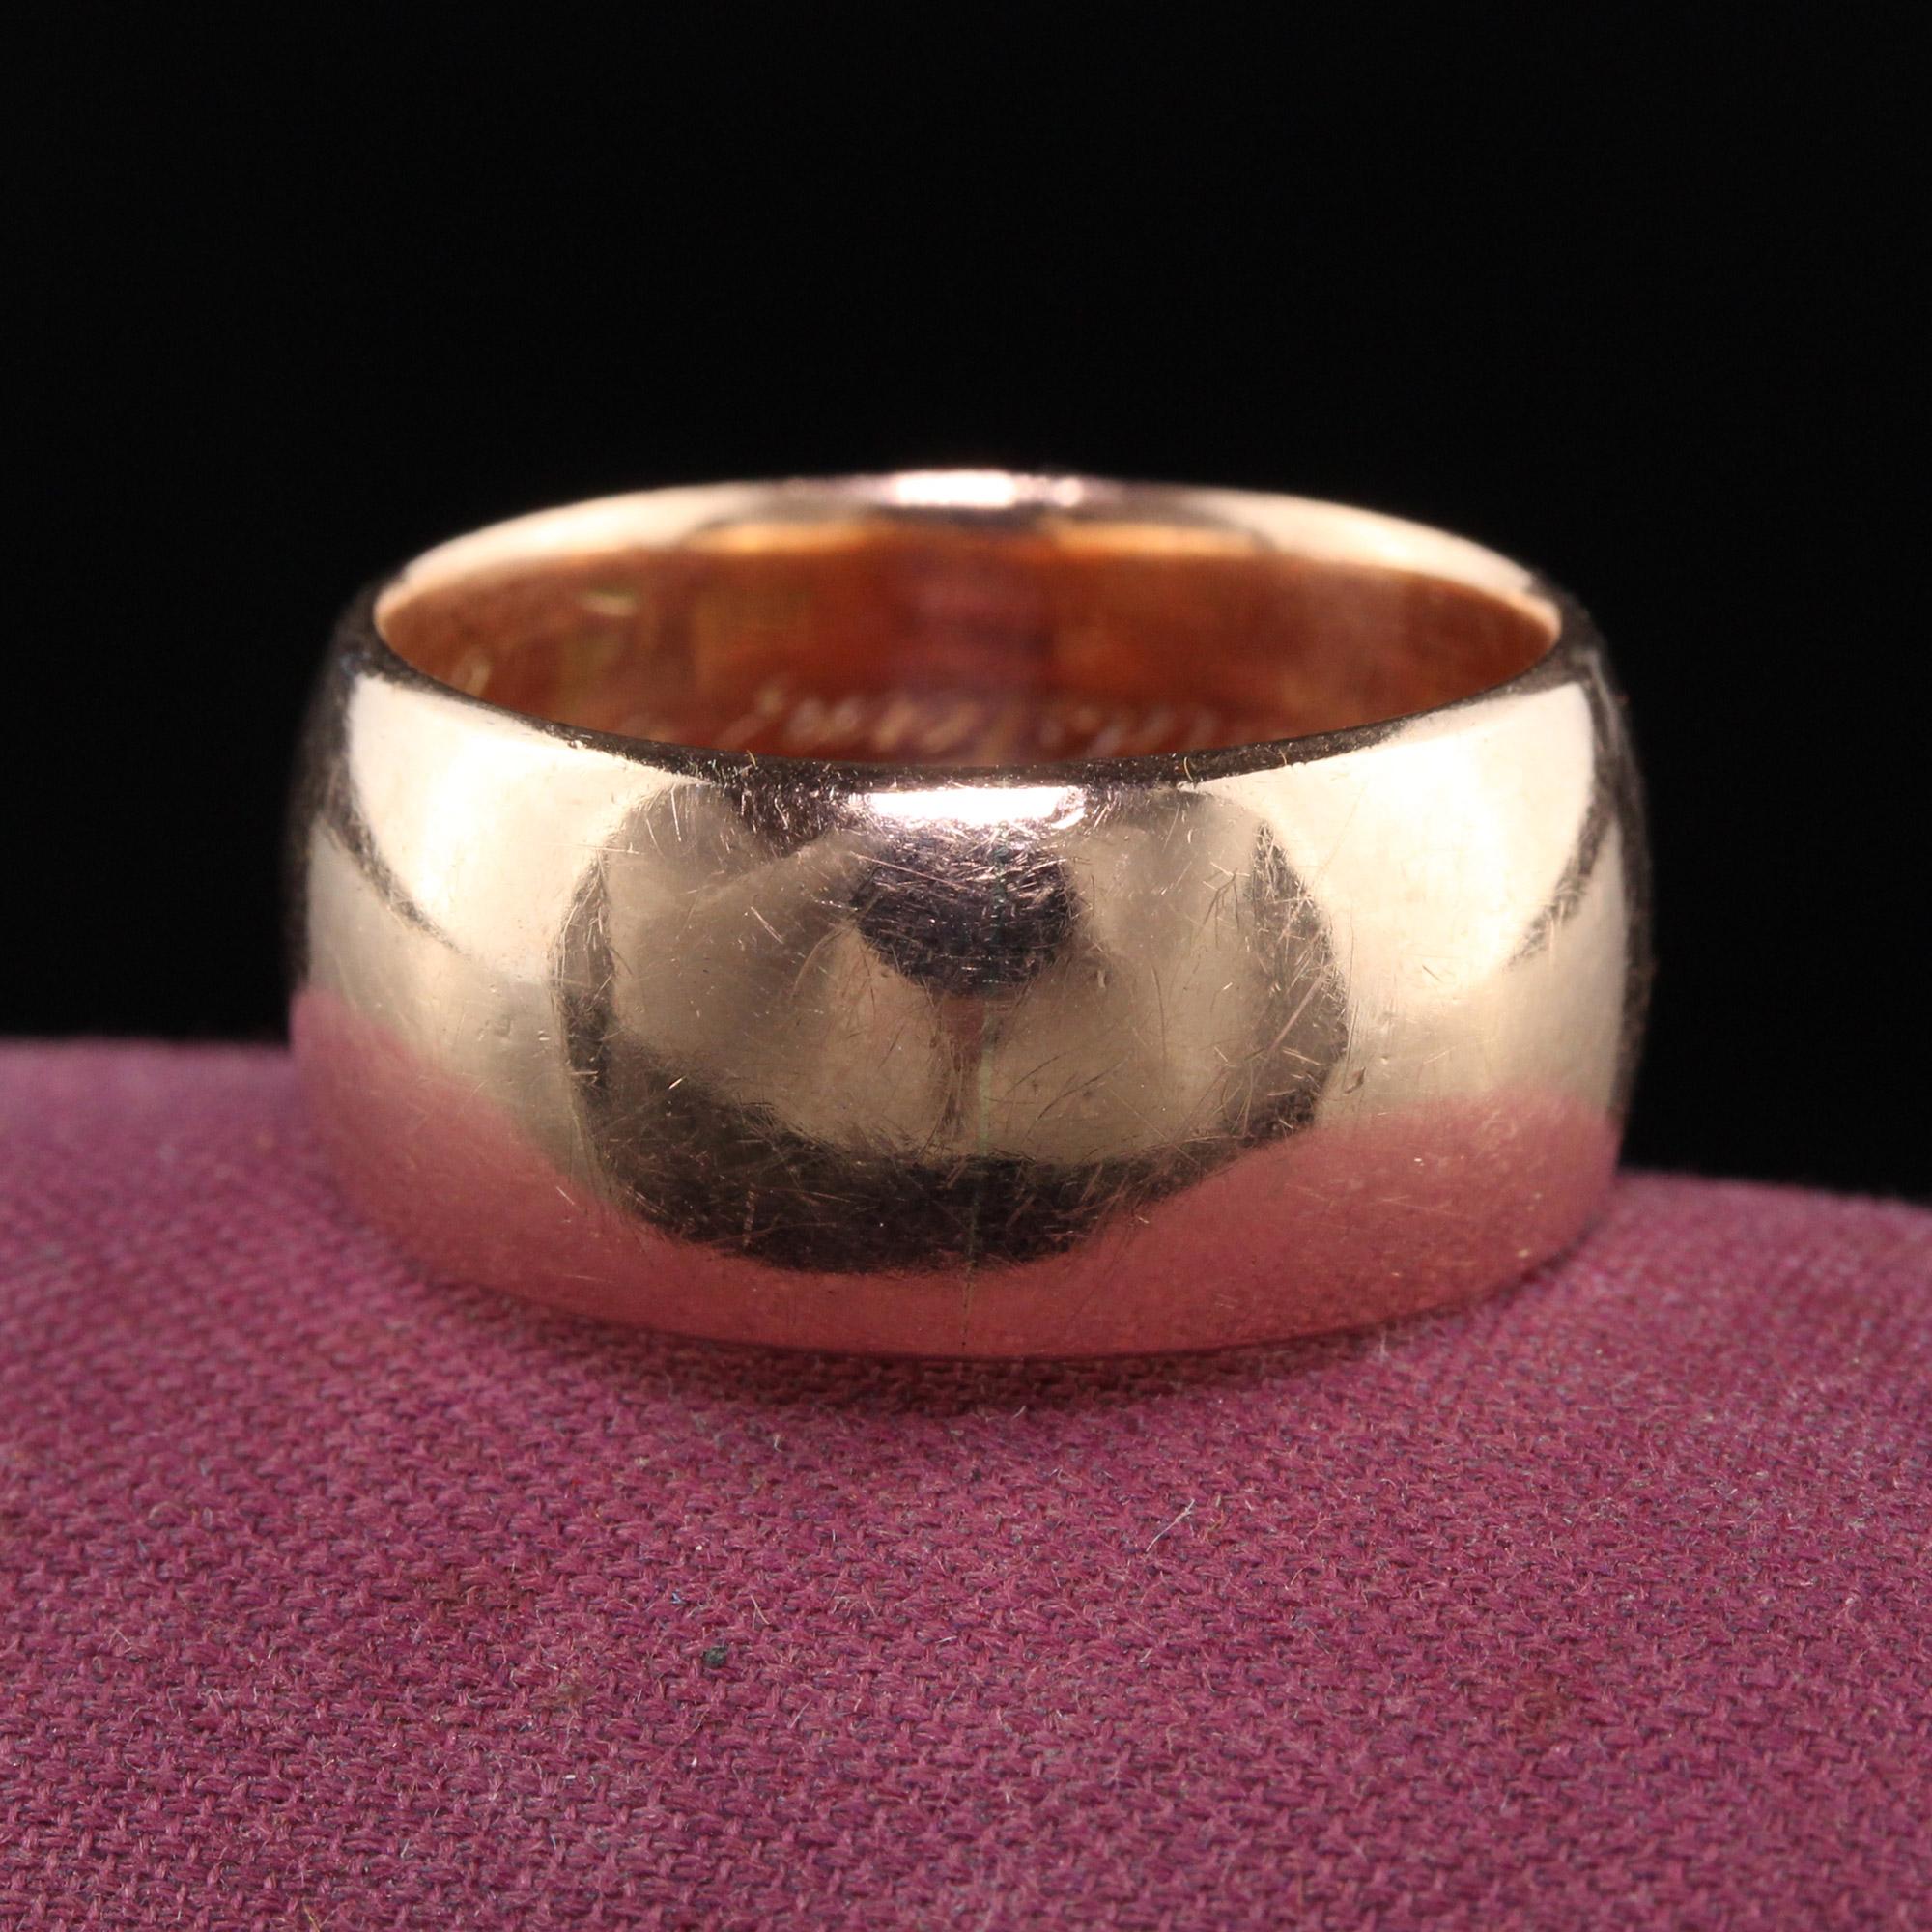 Beautiful Antique Victorian 14K Rose Gold Wide Engraved Wedding Band. This incredible wedding band is crafted in 14K rose gold and is very wide. The inside of the ring is engraved 